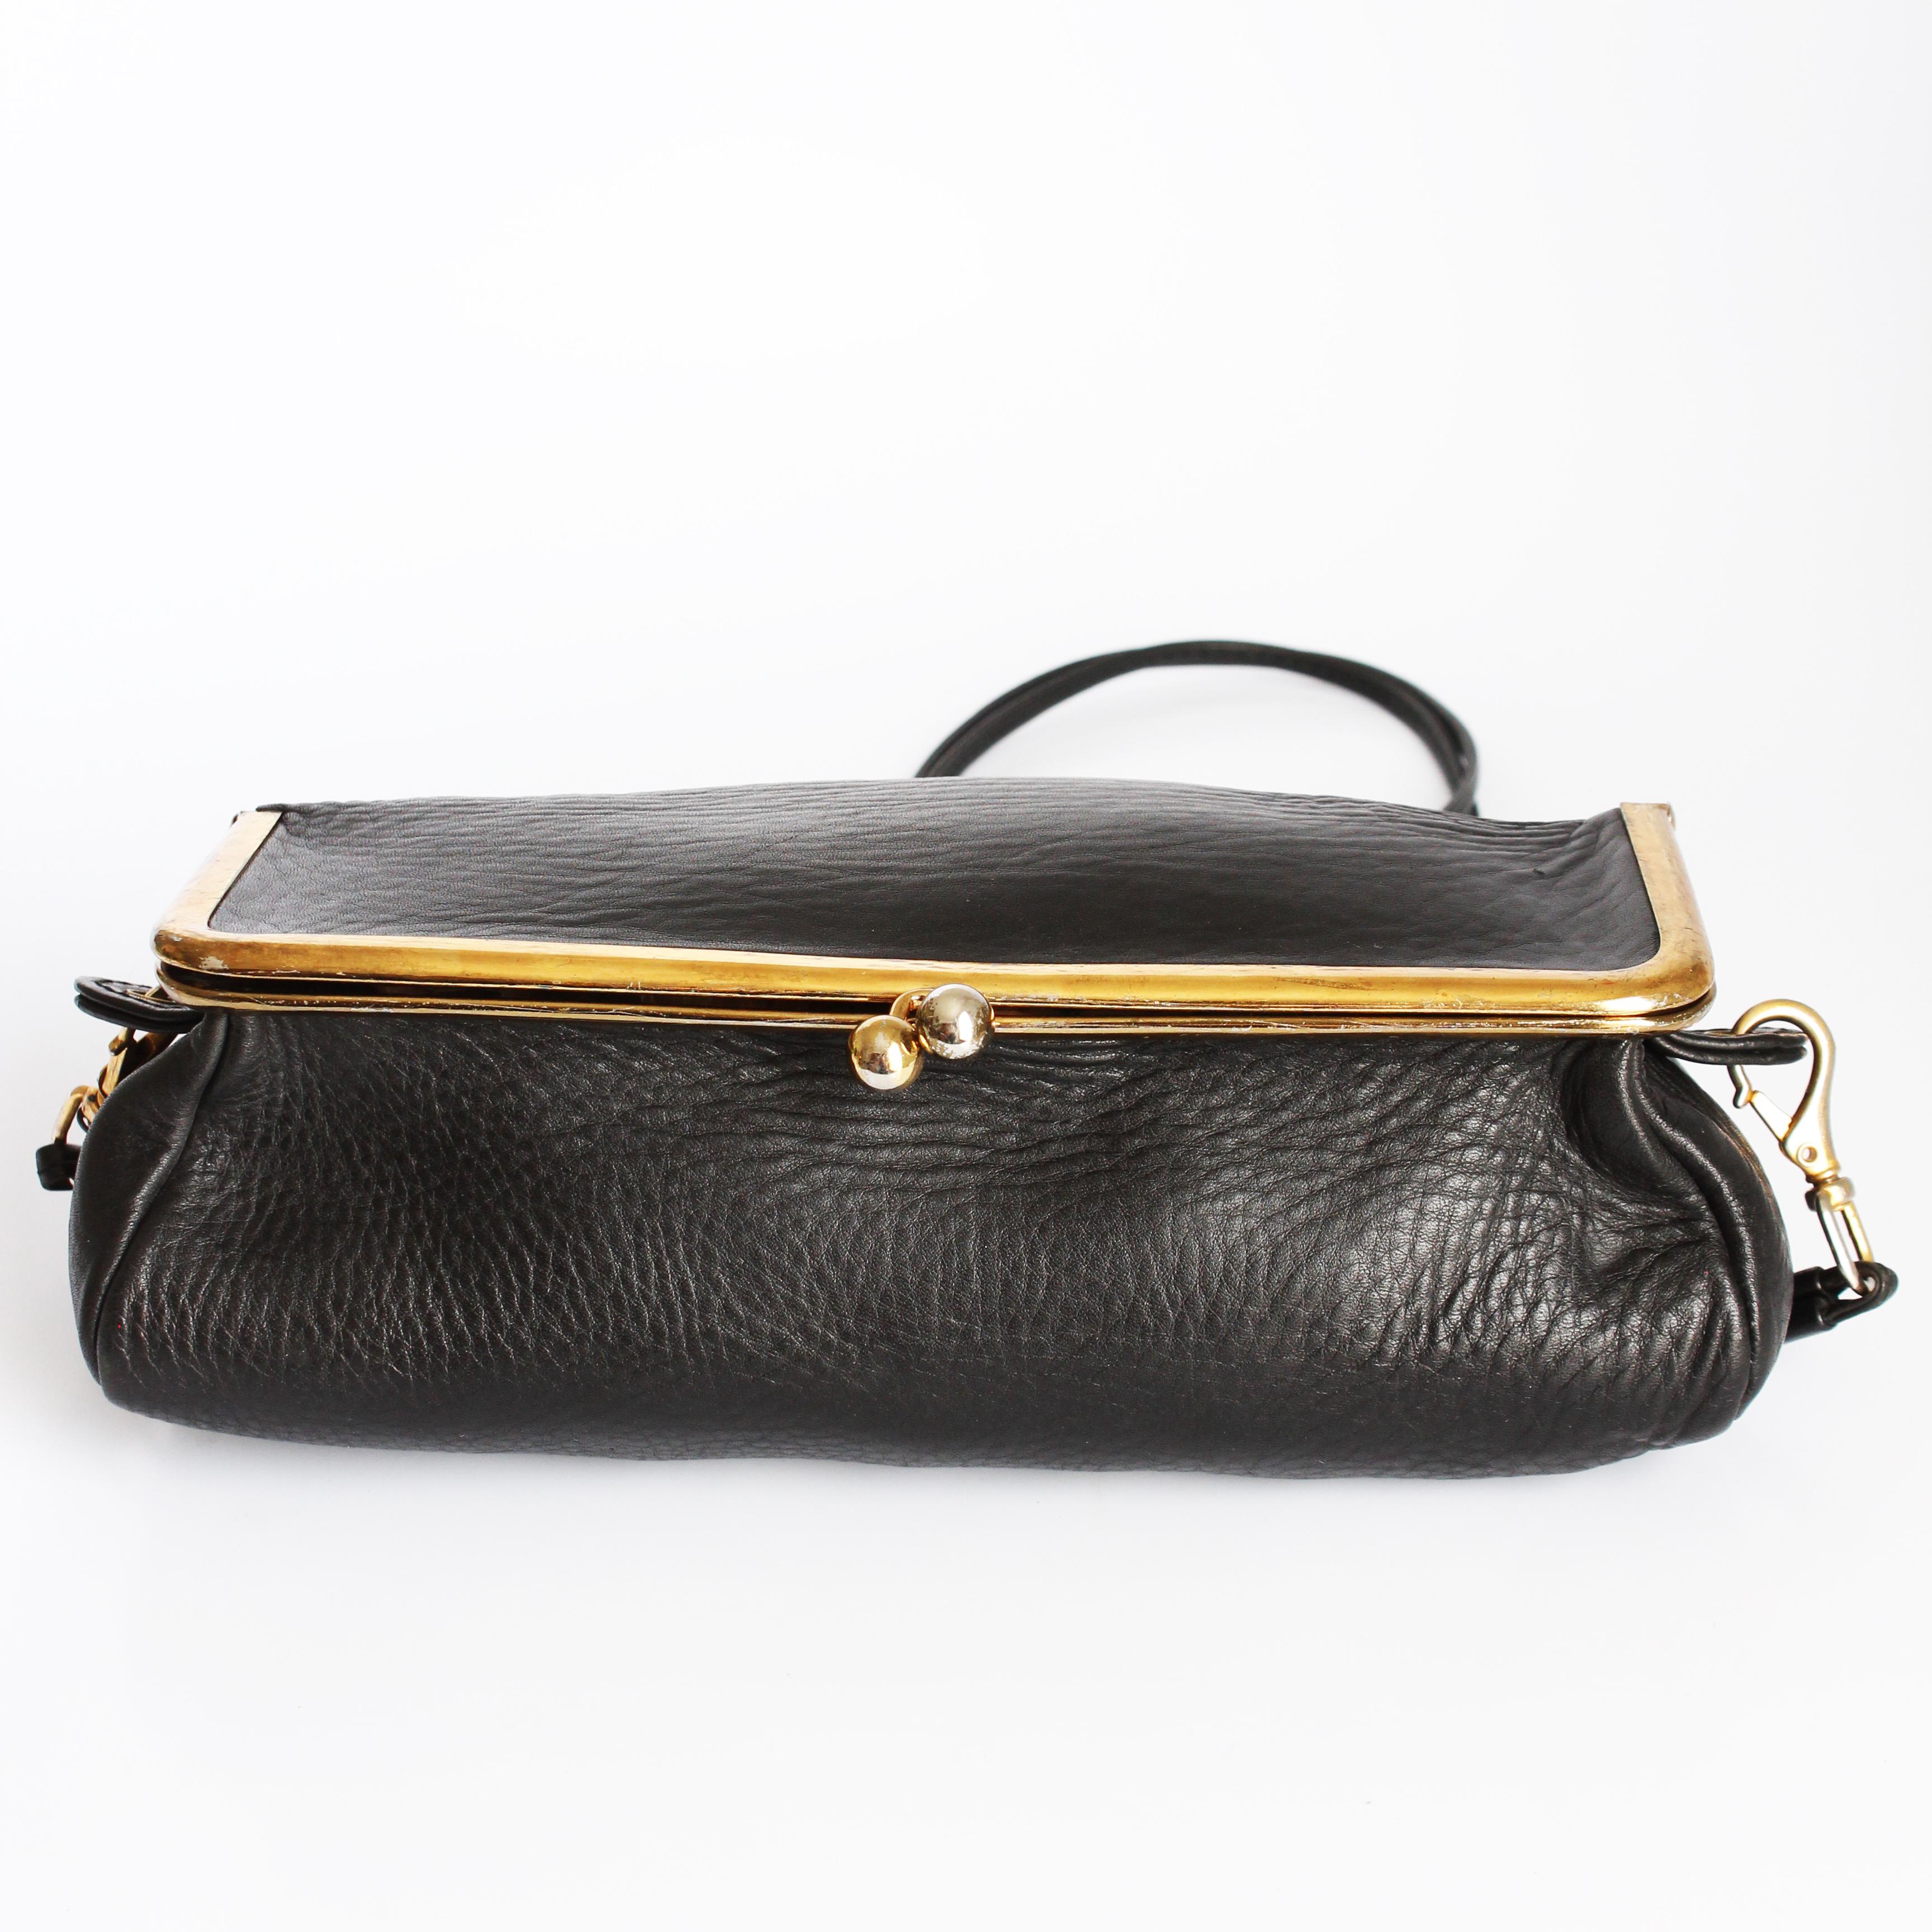 Preowned, vintage Bonnie Cashin for Meyers 'Box Bag' aka the bicycle purse, likely made in the mid 1970s.  Made from supple black pebbled leather, it fastens with a large kiss lock and features a removable double strand leather strap with brass push